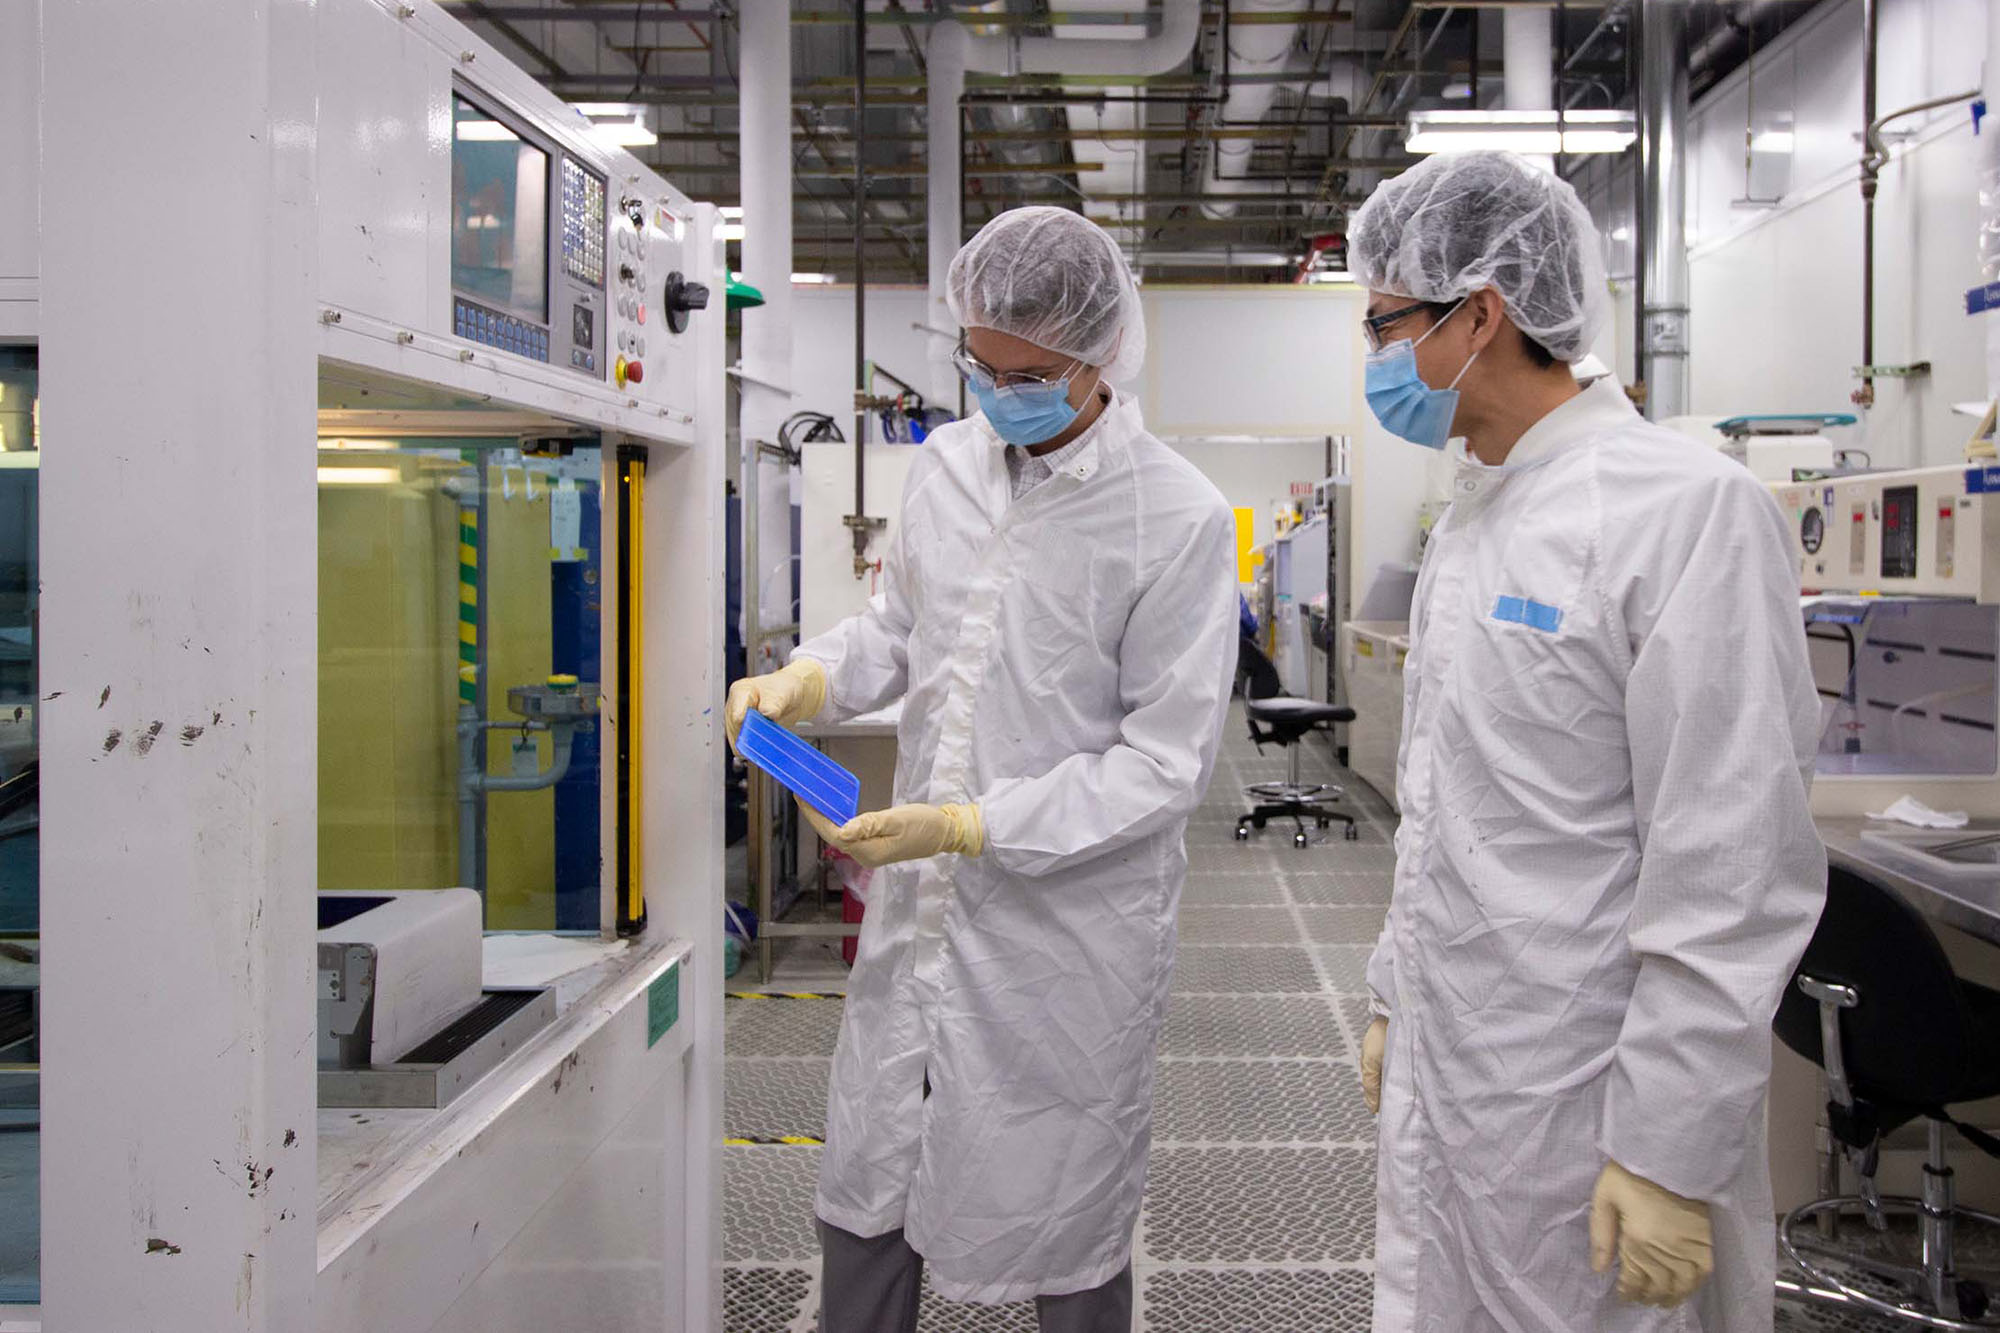 Two researchers wearing protective clothing (hairnets, masks, gloves and lab coats) examine an object one is holding inside of a very large research facility.